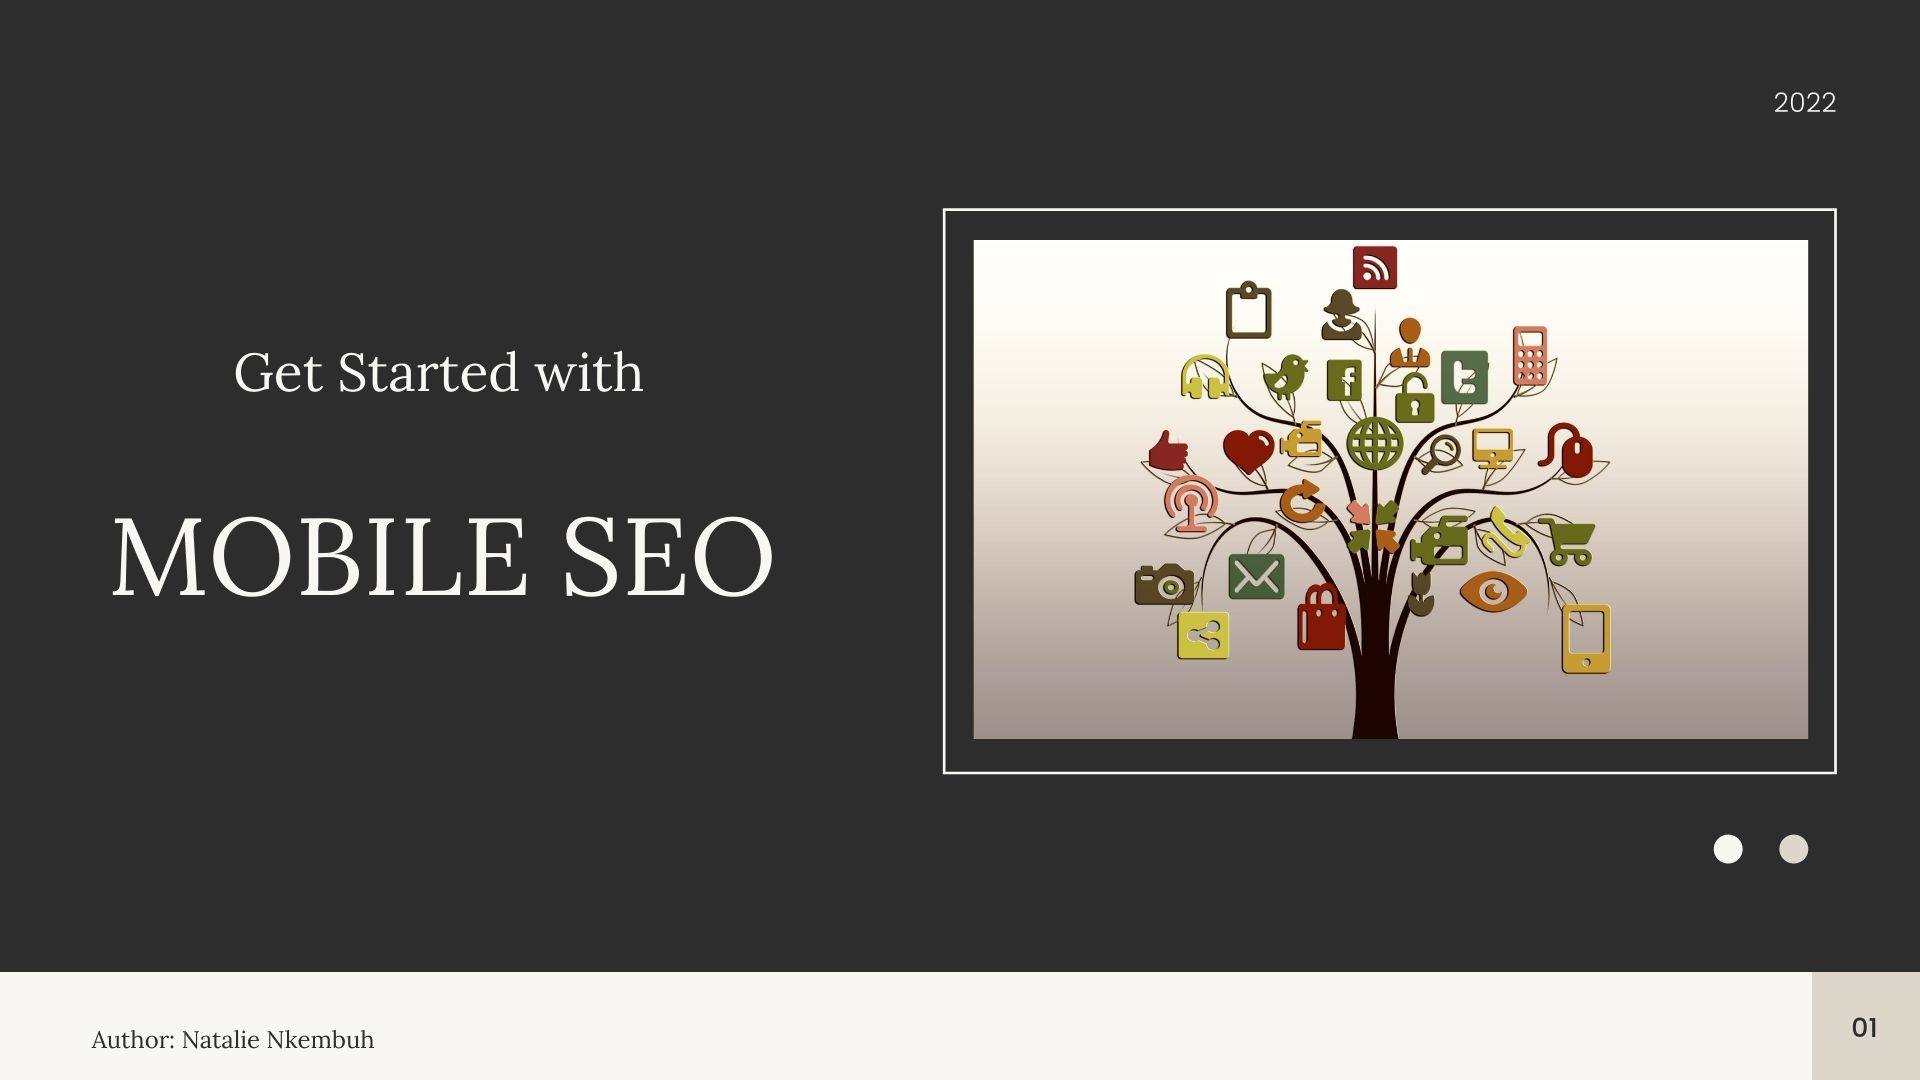 Get started with Mobile Search Engine Optimisation